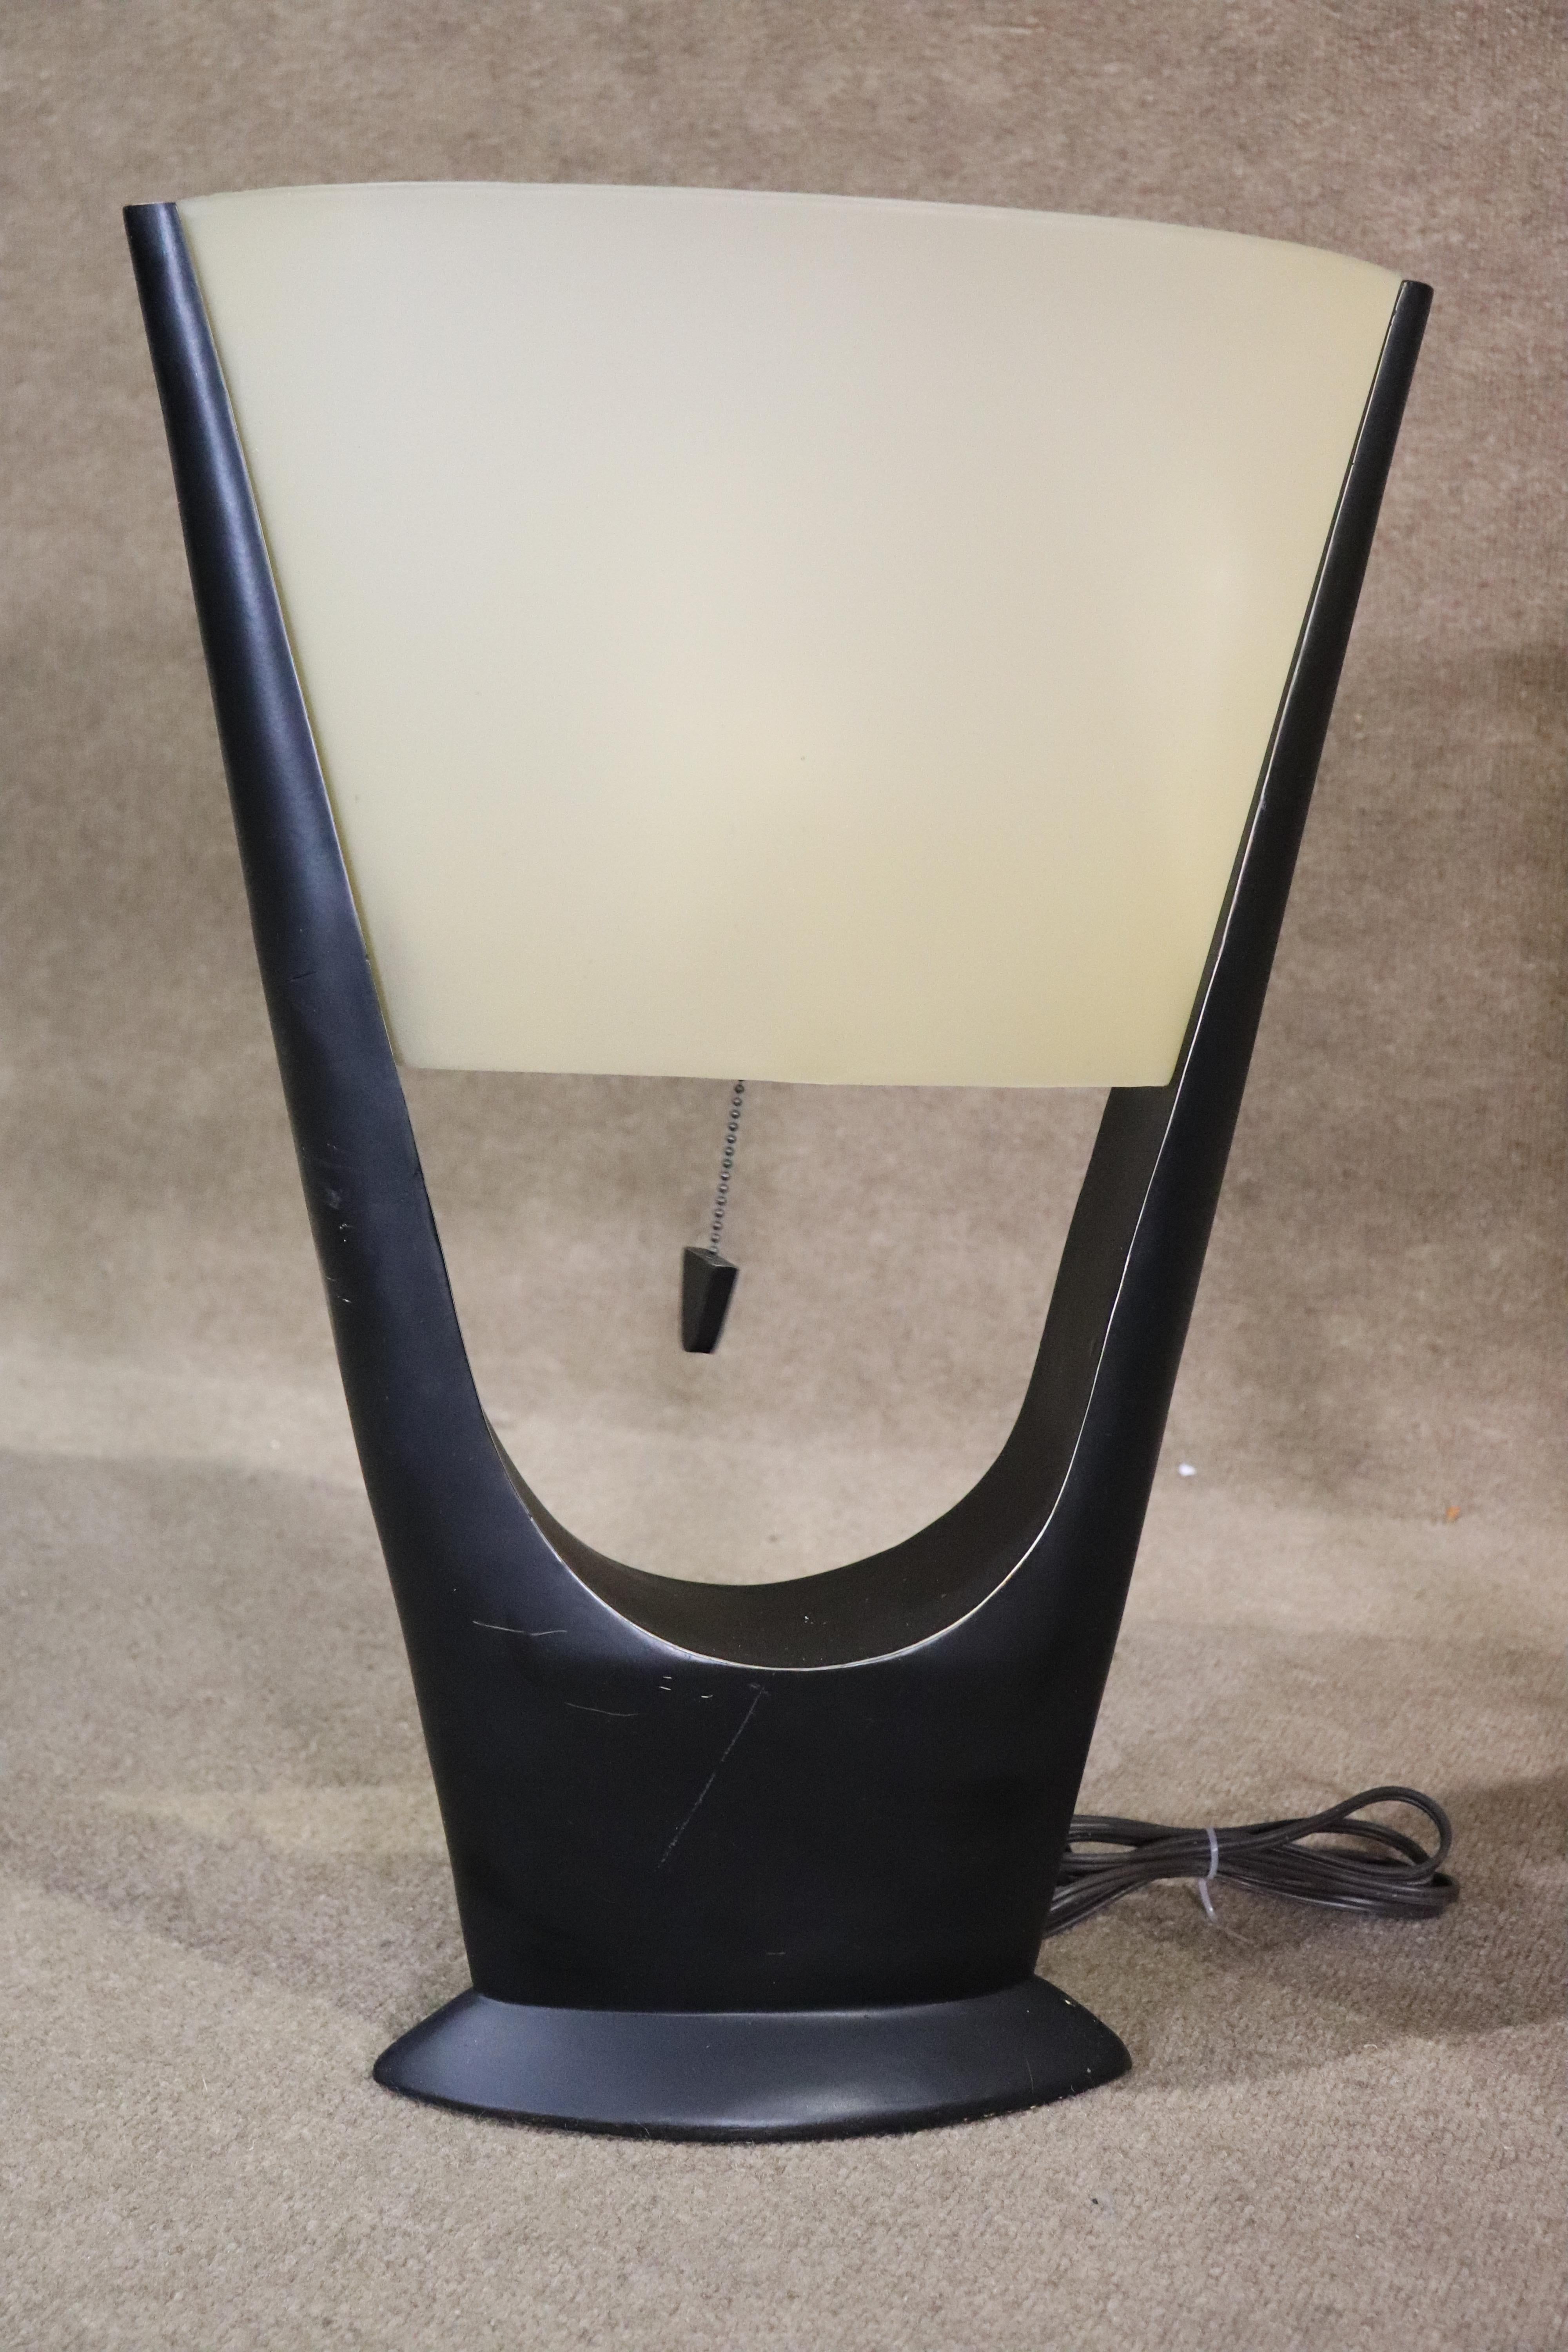 Pair of deco style tables lamps with built in plastic shades. Black sculpted bases with pull string sockets.
Please confirm location NY or NJ